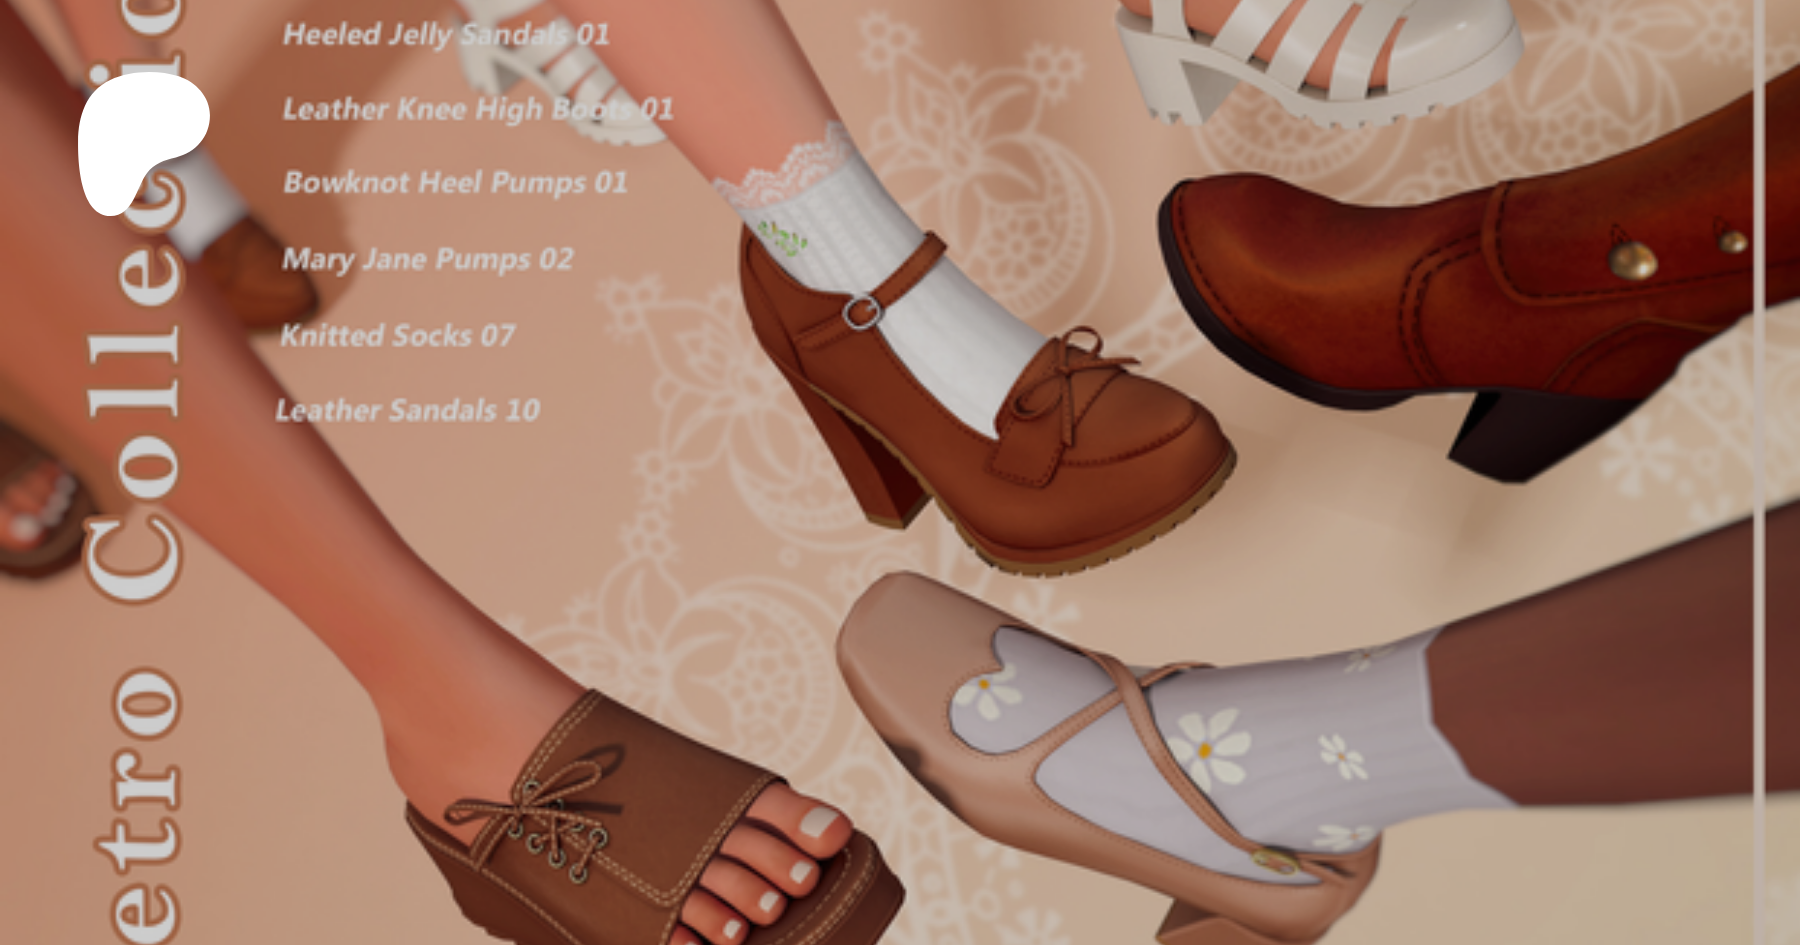 JC Bow Heels Set by bergdorfsims from Patreon